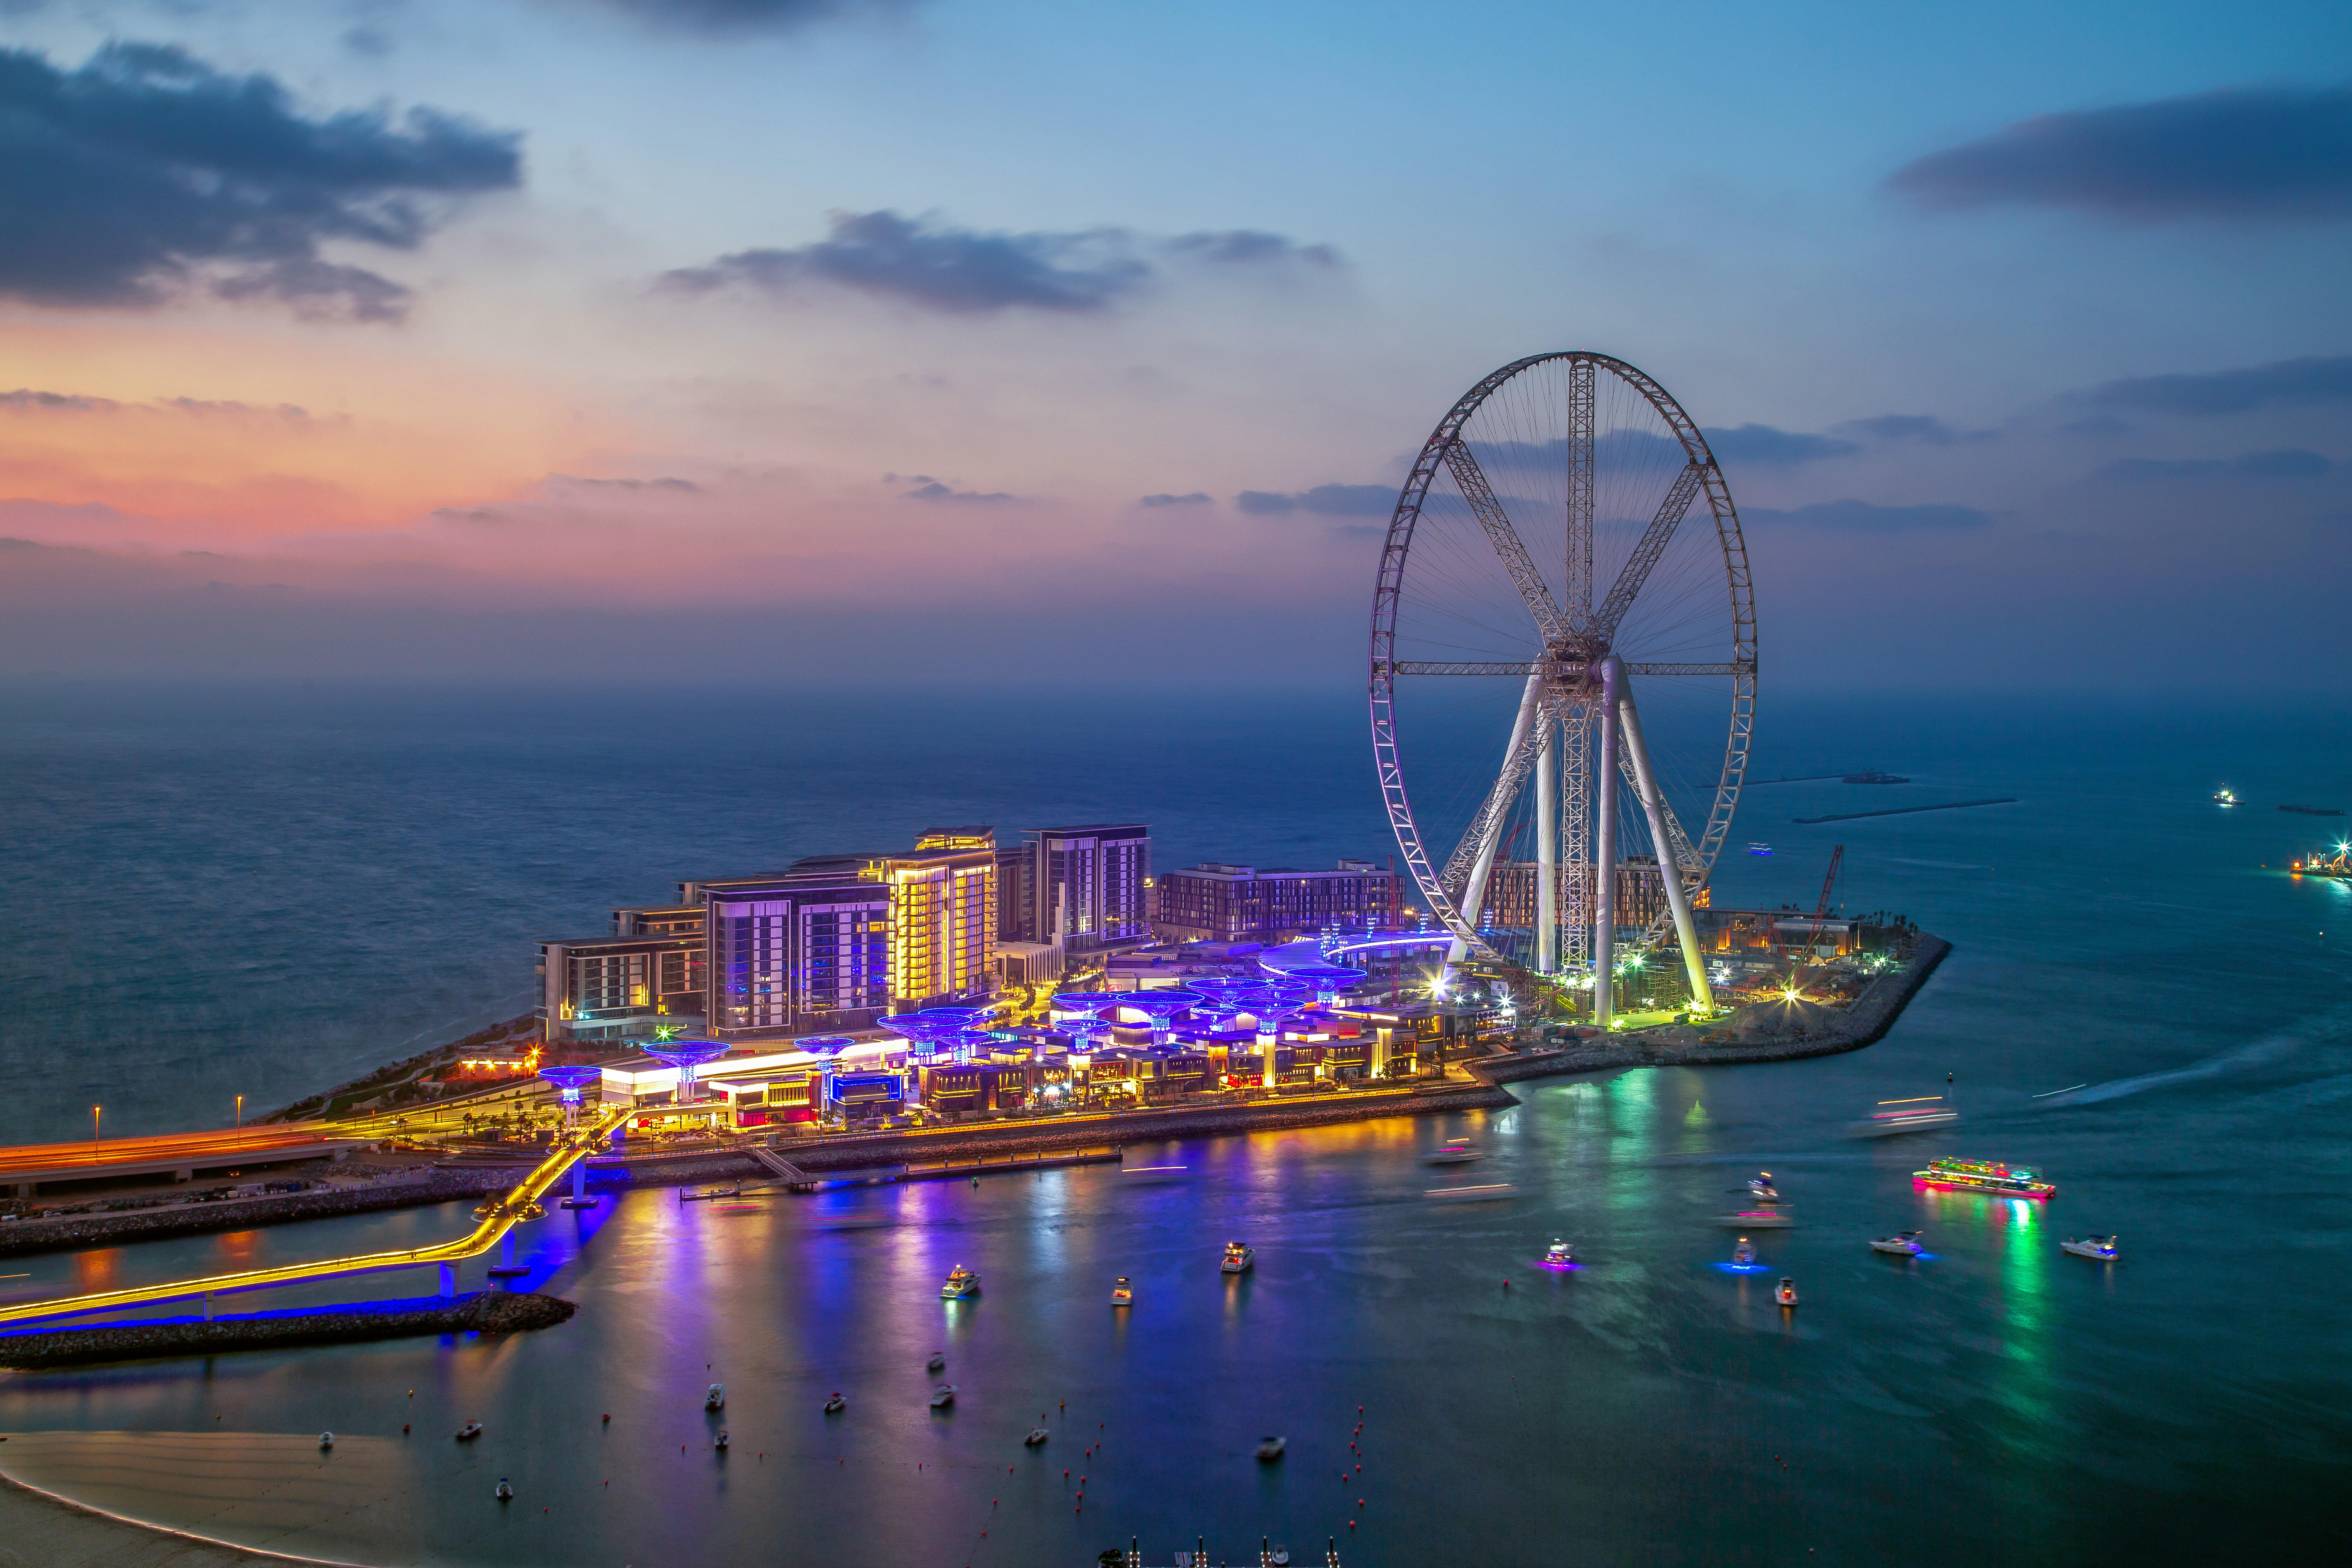 What to expect at Bluewaters Island Dubai - Dubai Travel Planner